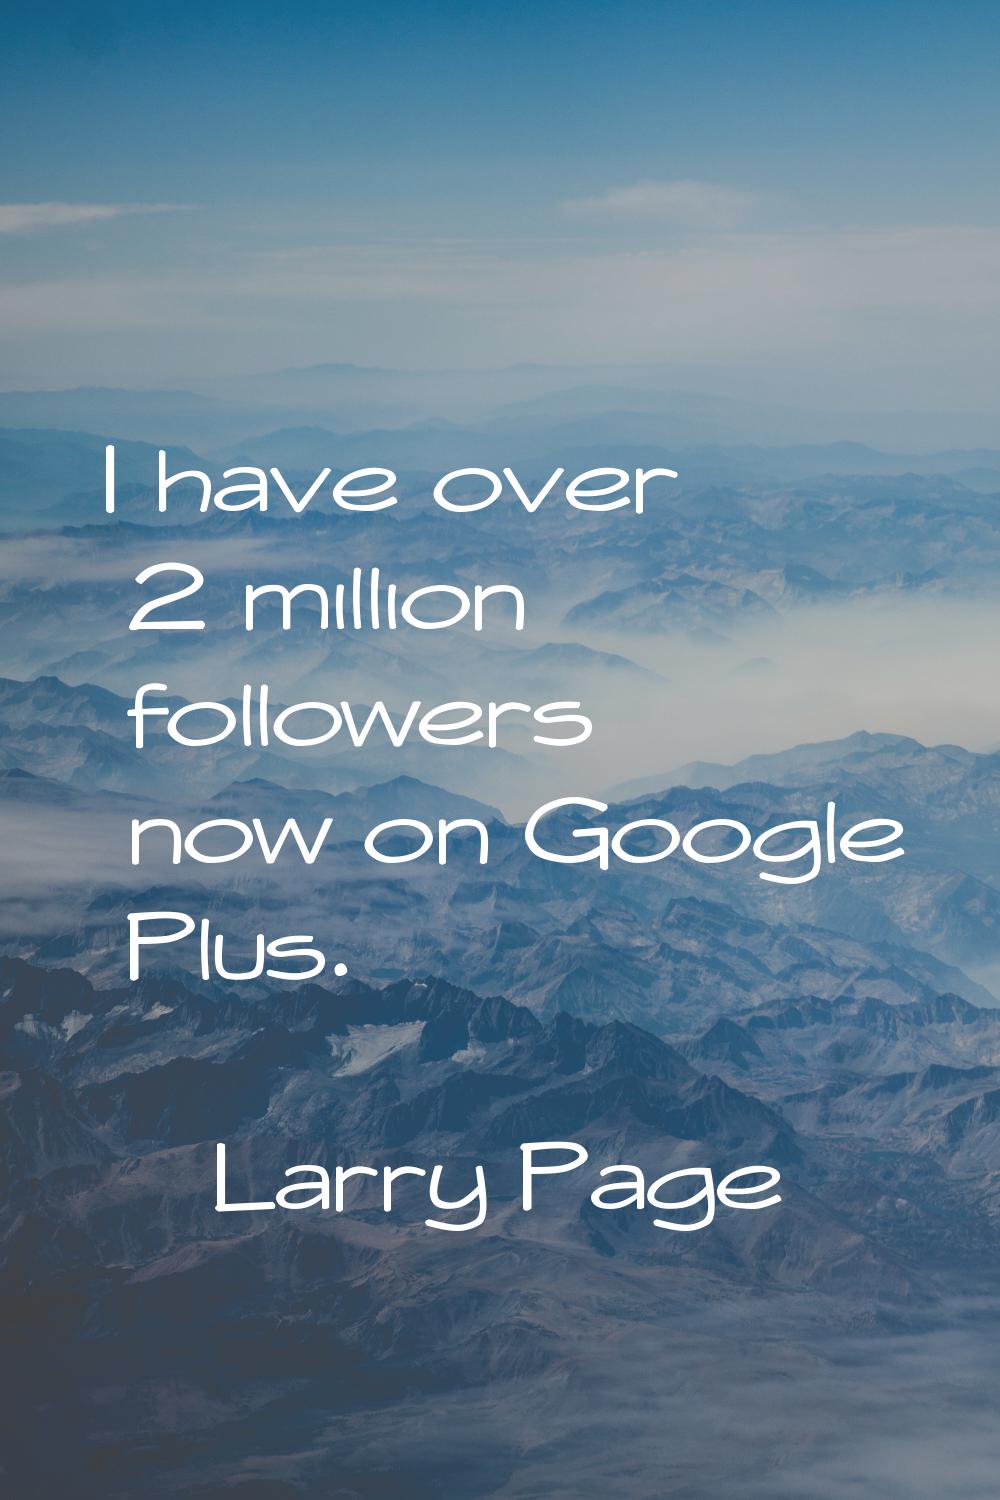 I have over 2 million followers now on Google Plus.